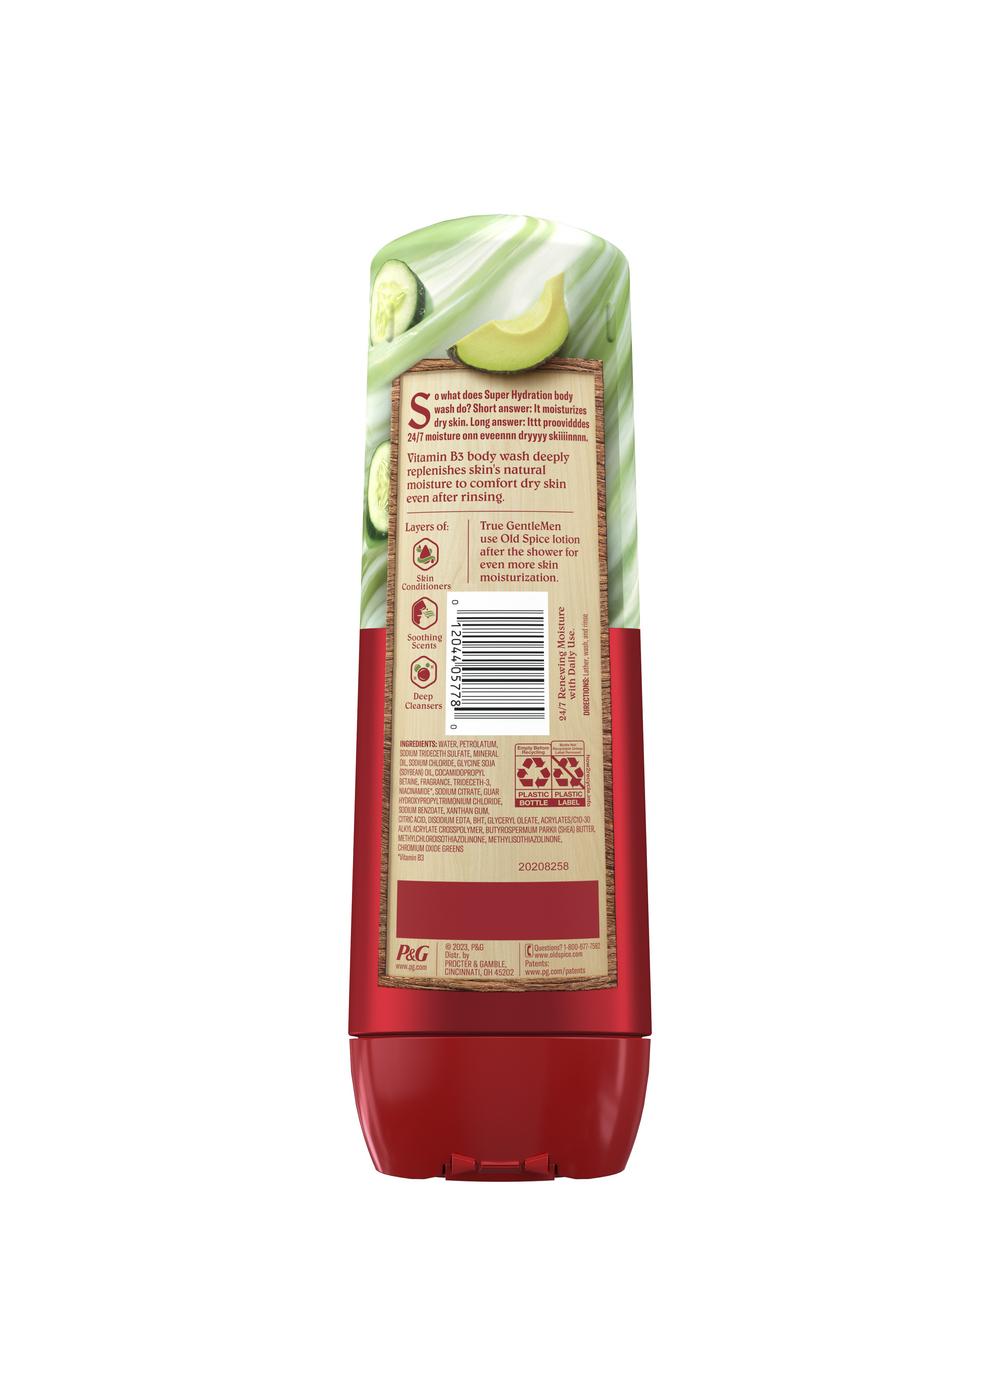 Old Spice GentleMan's Body Wash Cucumber + Avocado Oil; image 2 of 2